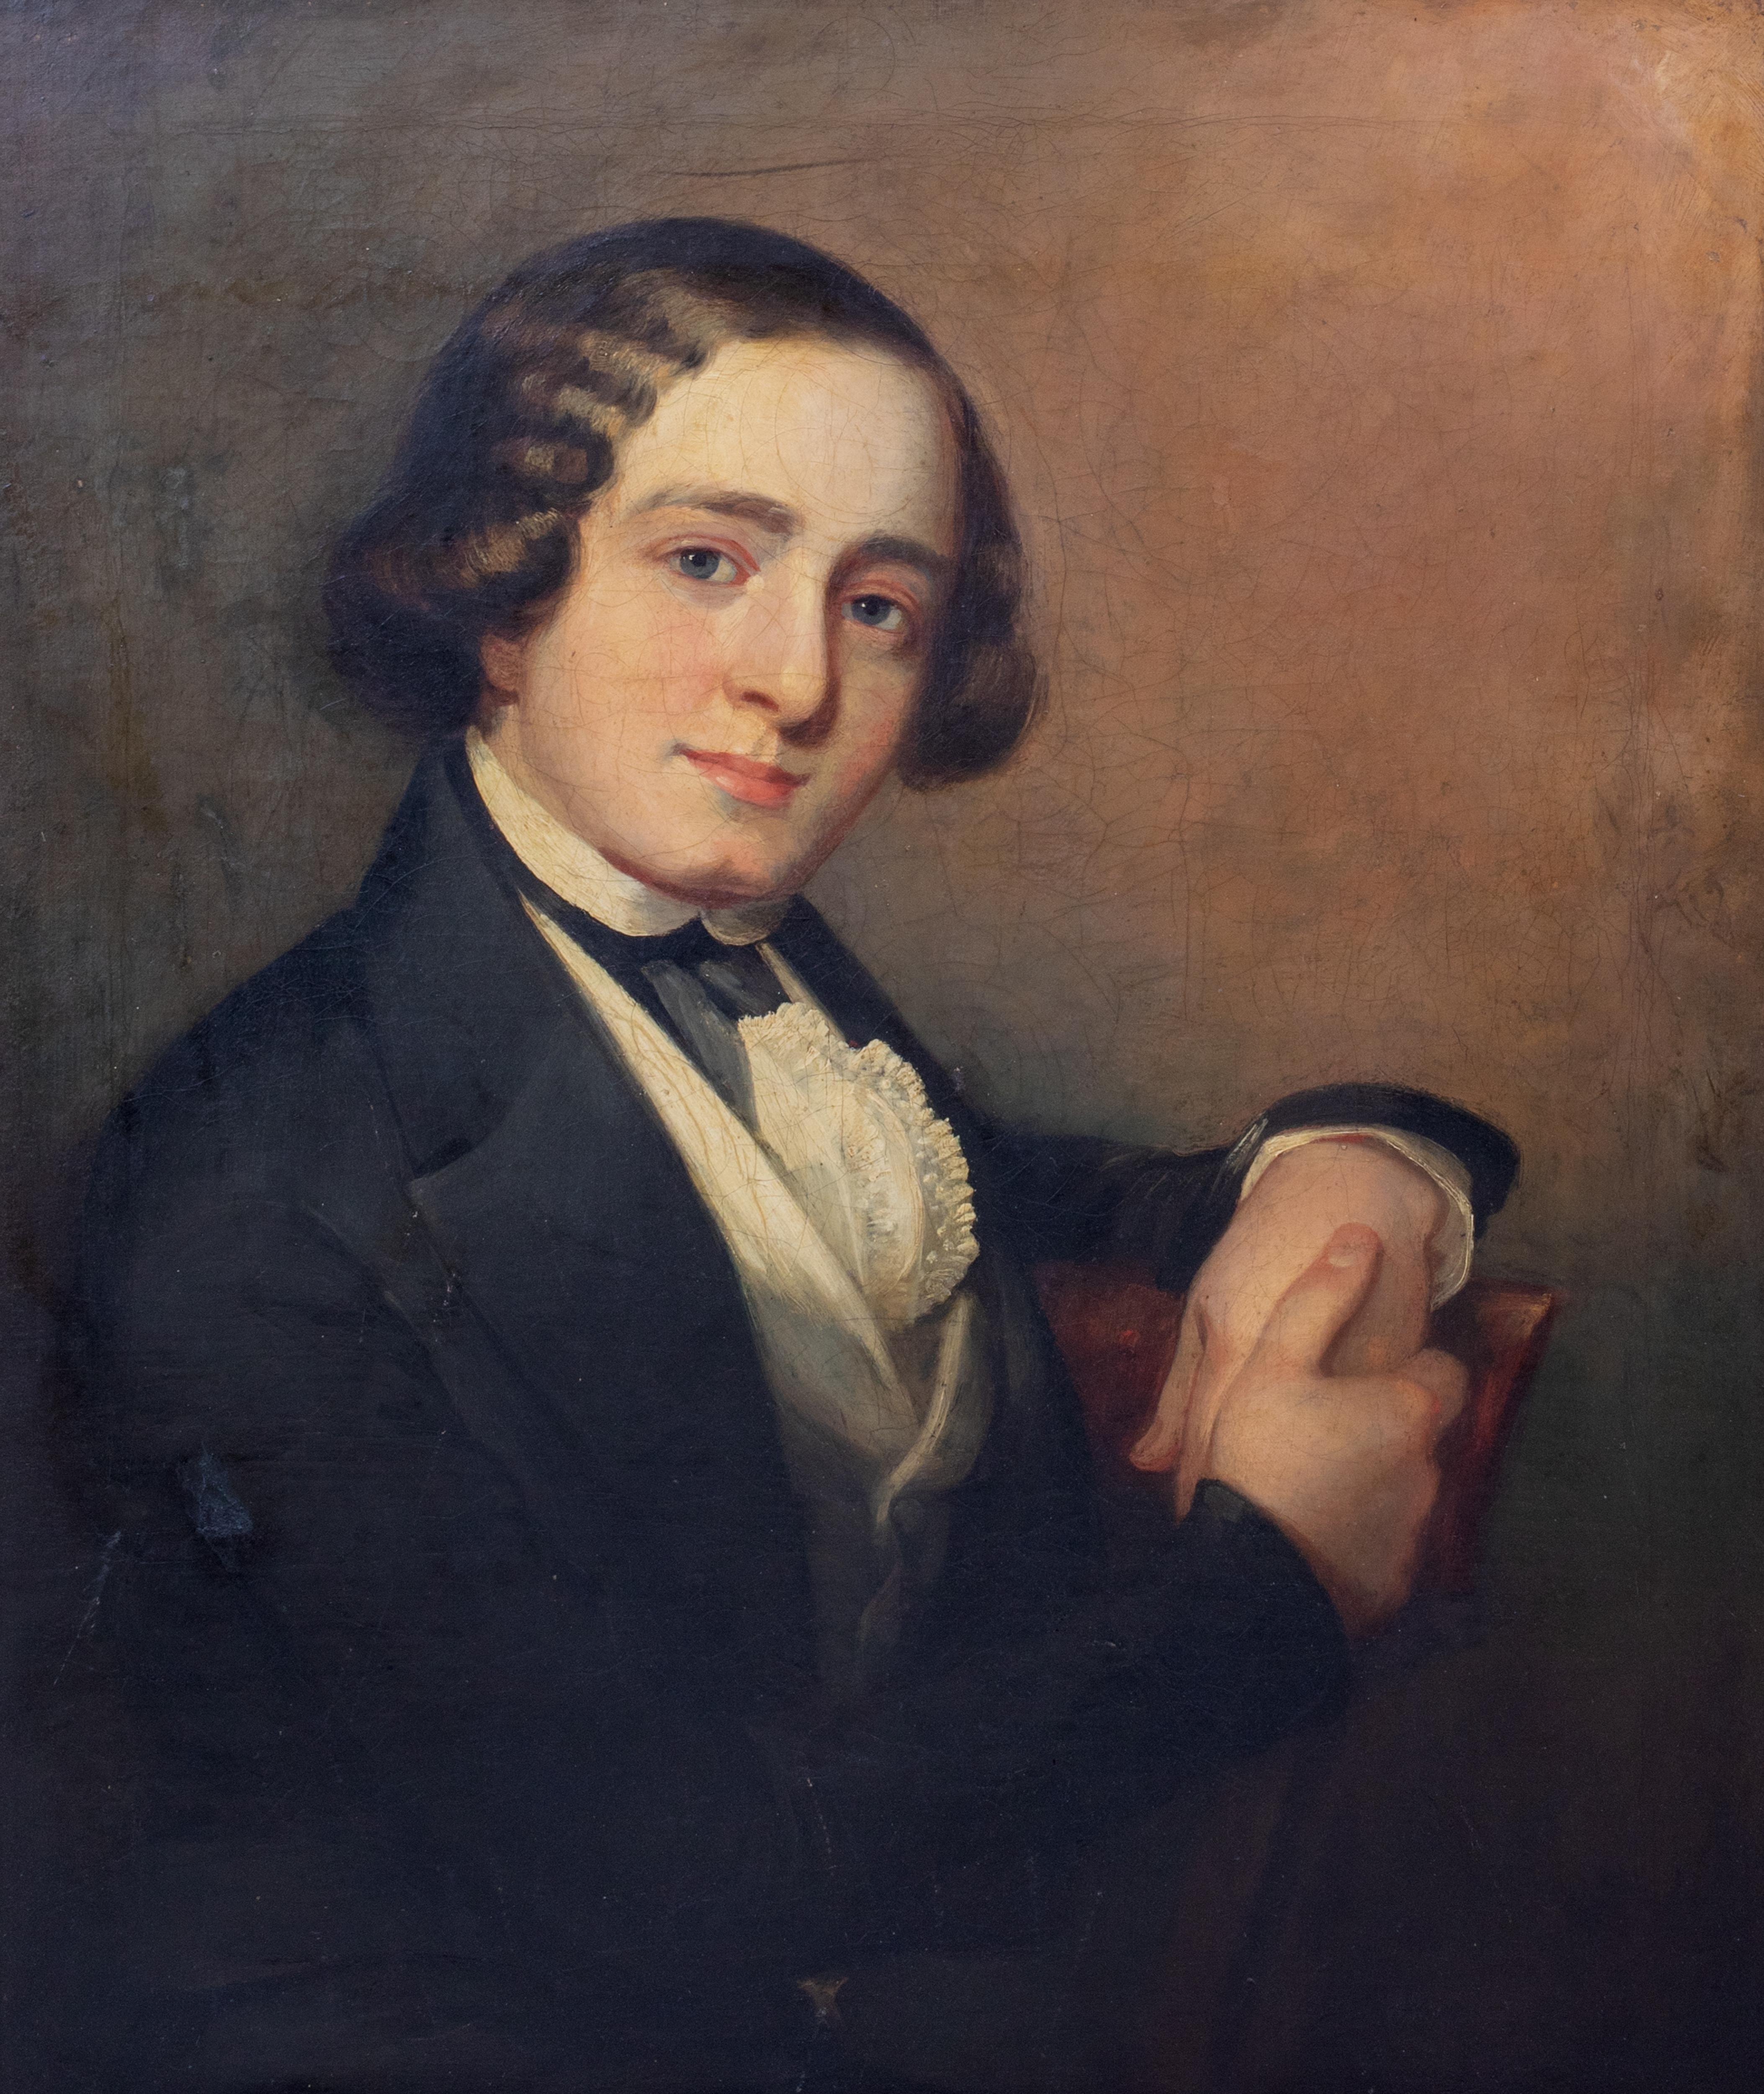 Portrait Of Charles Dickens (1812-1870), dated 1840

by Daniel MACLISE (1806-1870) sales to $600,000

Large 1840 portrait of a young Charles Dickens, oil on canvas by Daniel Maclise. Important early portrait of a young Charles Dickens sat on a chair